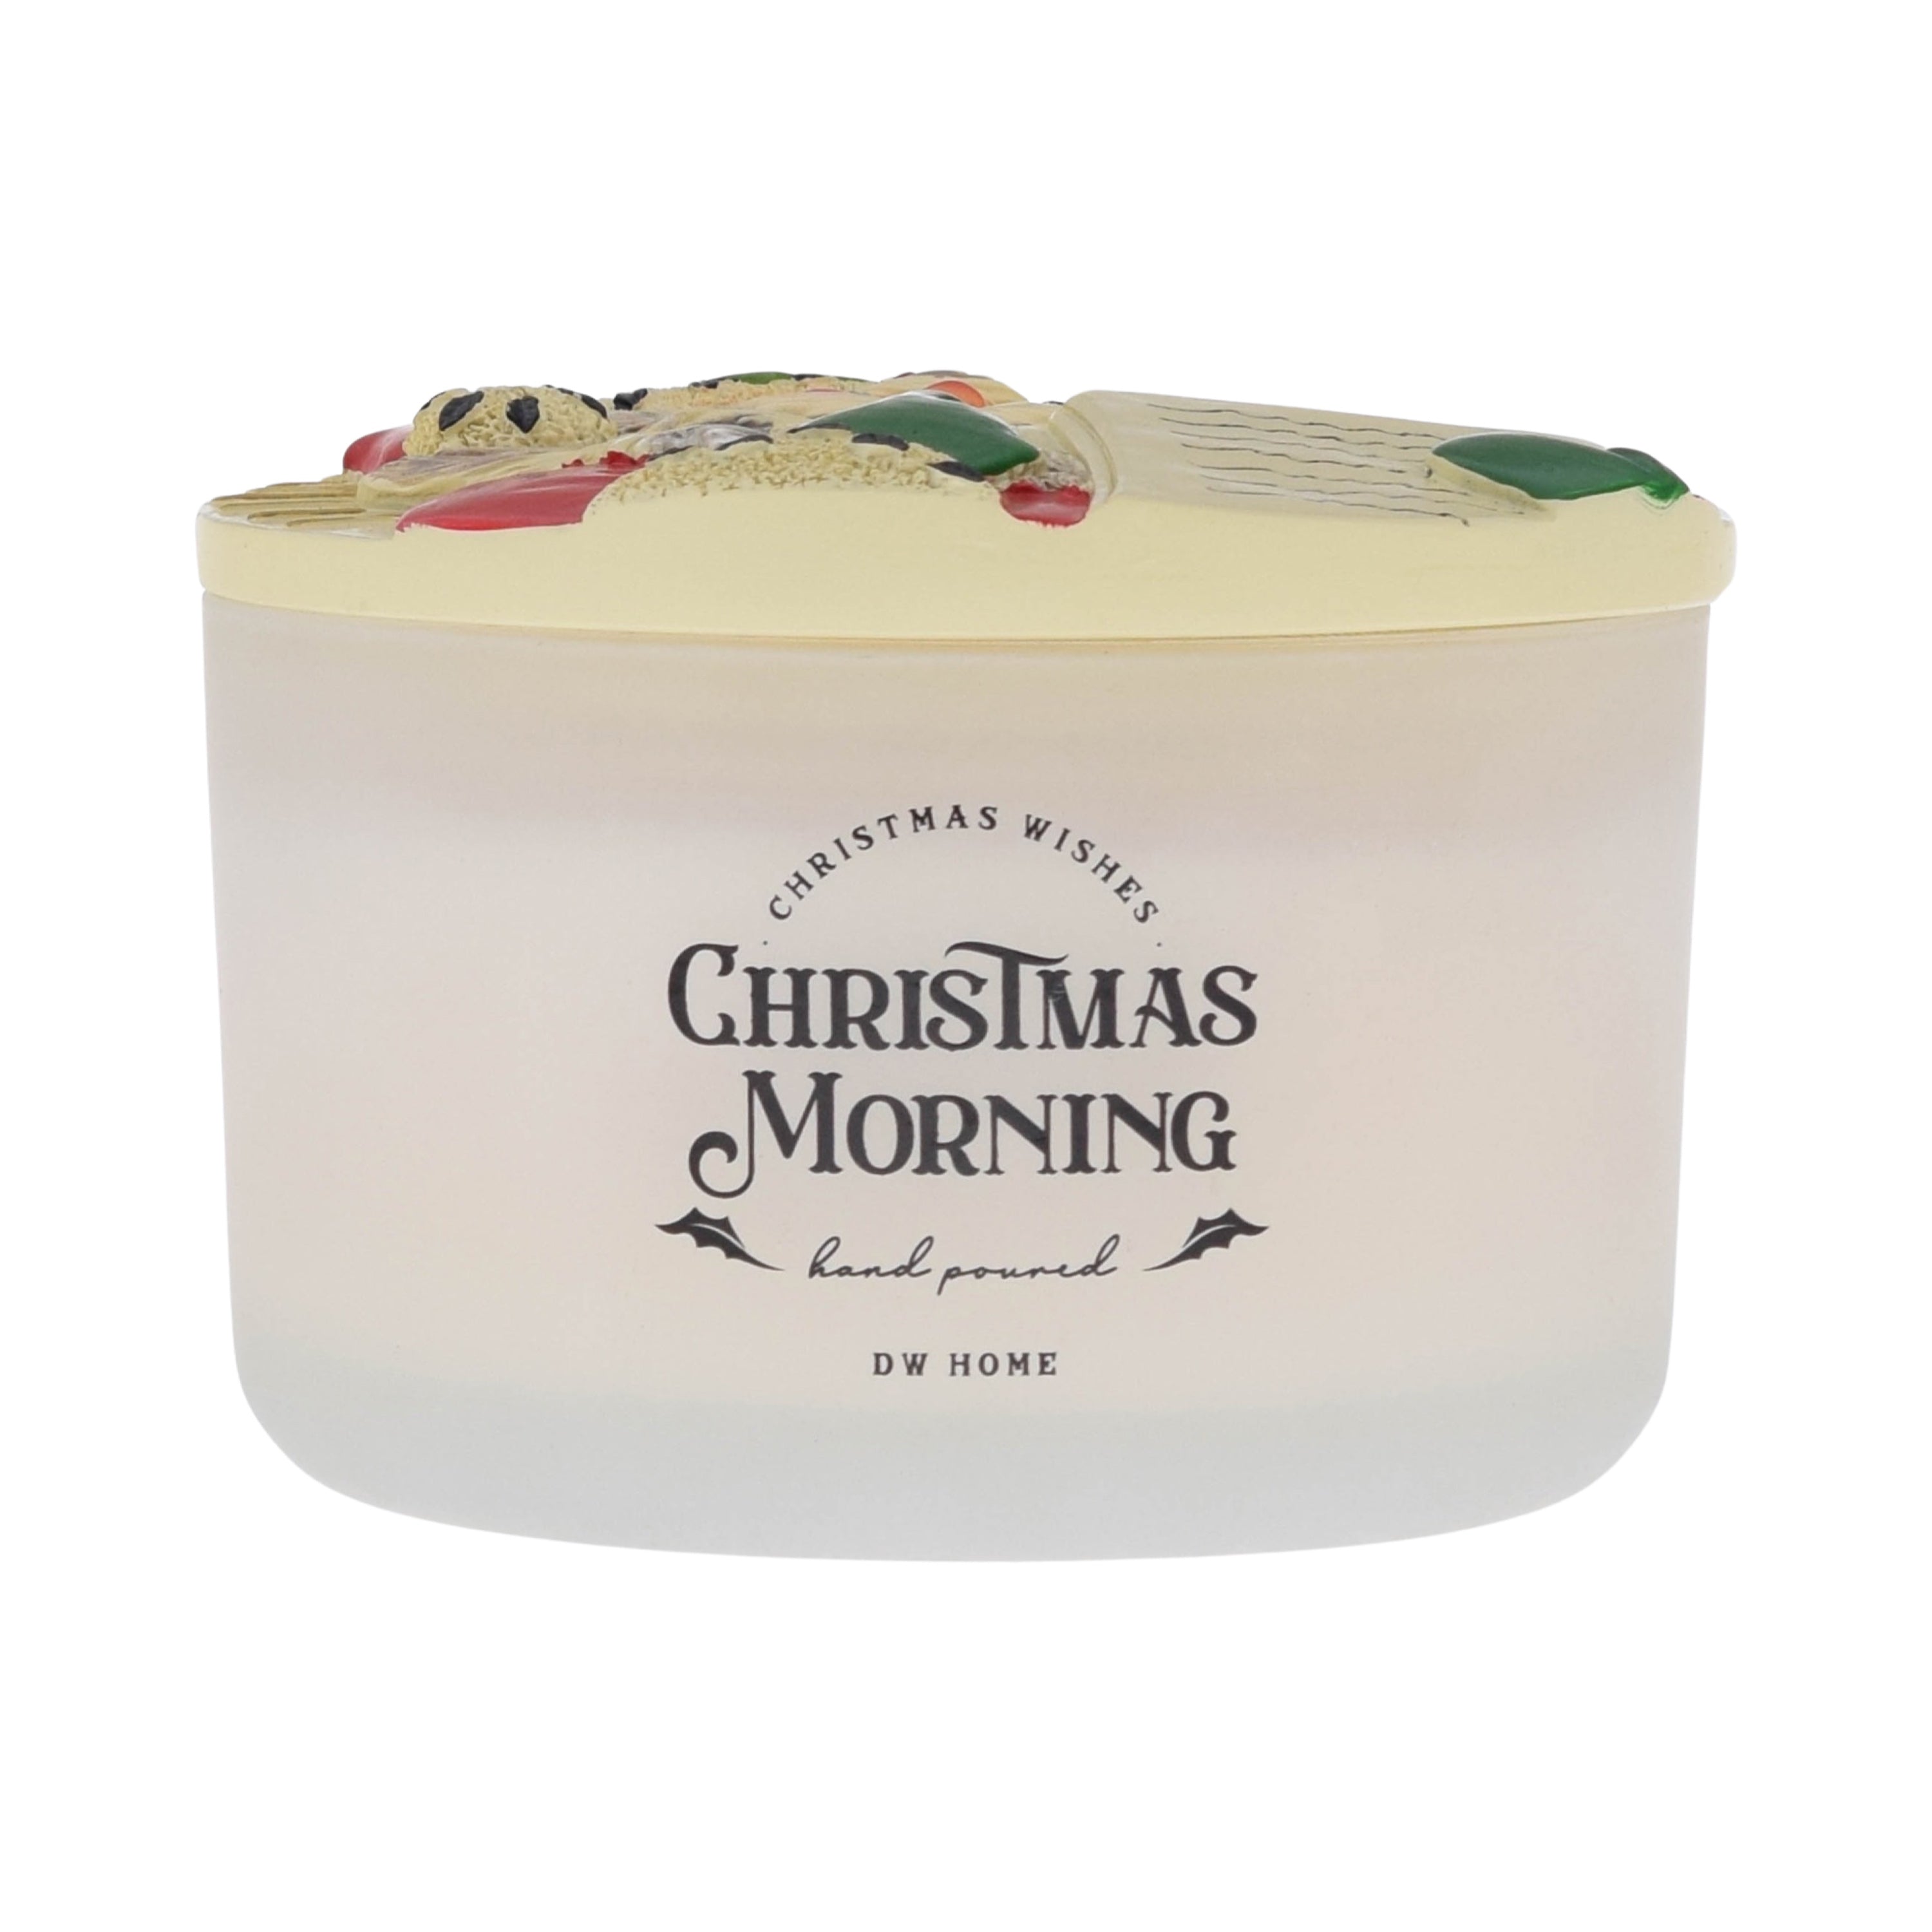 Christmas Morning Candle - Scented Holiday Candle, Scents of vanilla, –  Acute Designs